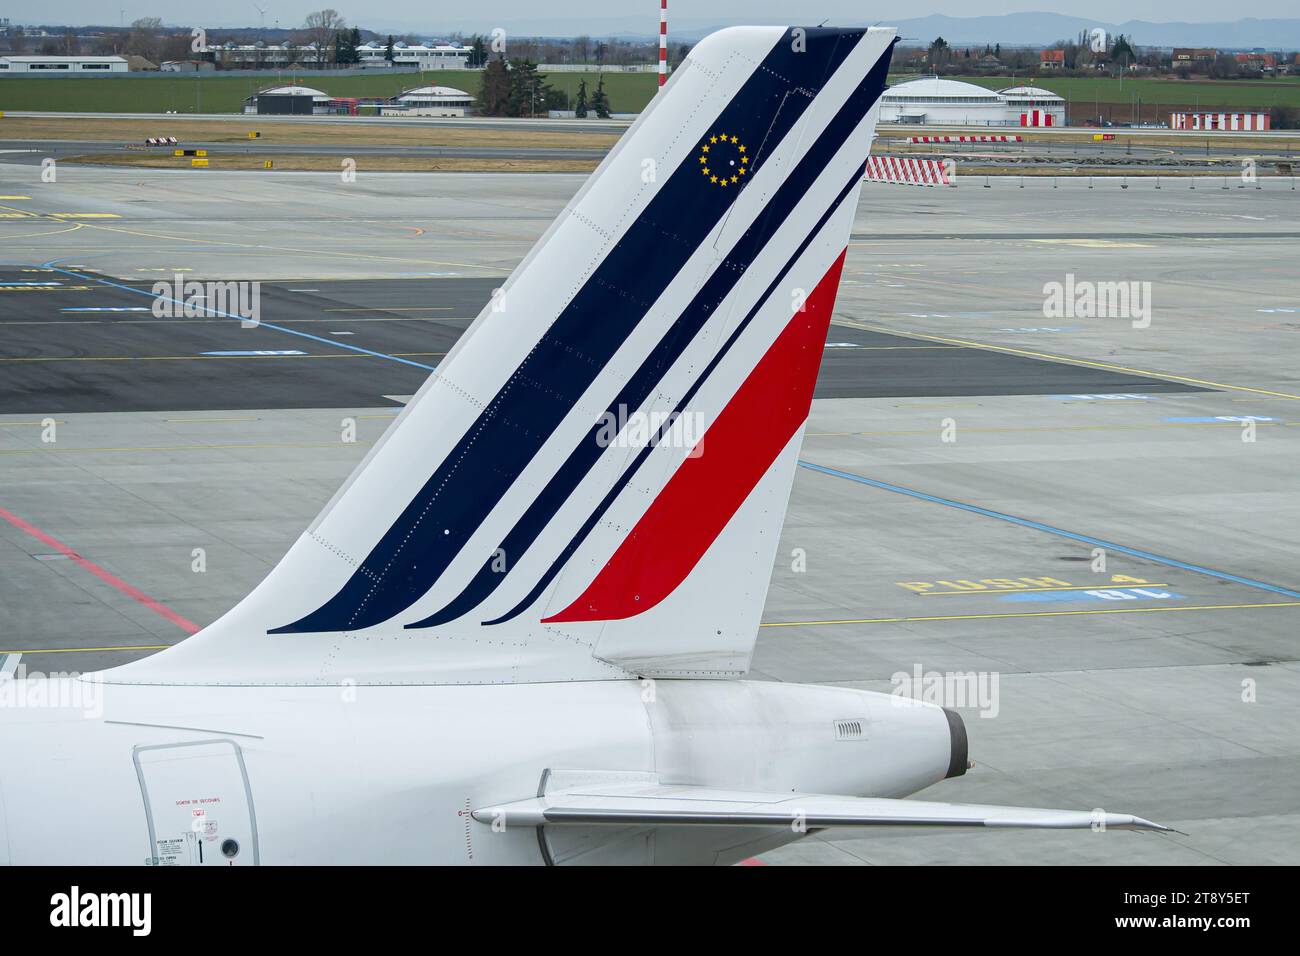 Air France Airbus A320 vertical stabilizer close-up photo Stock Photo